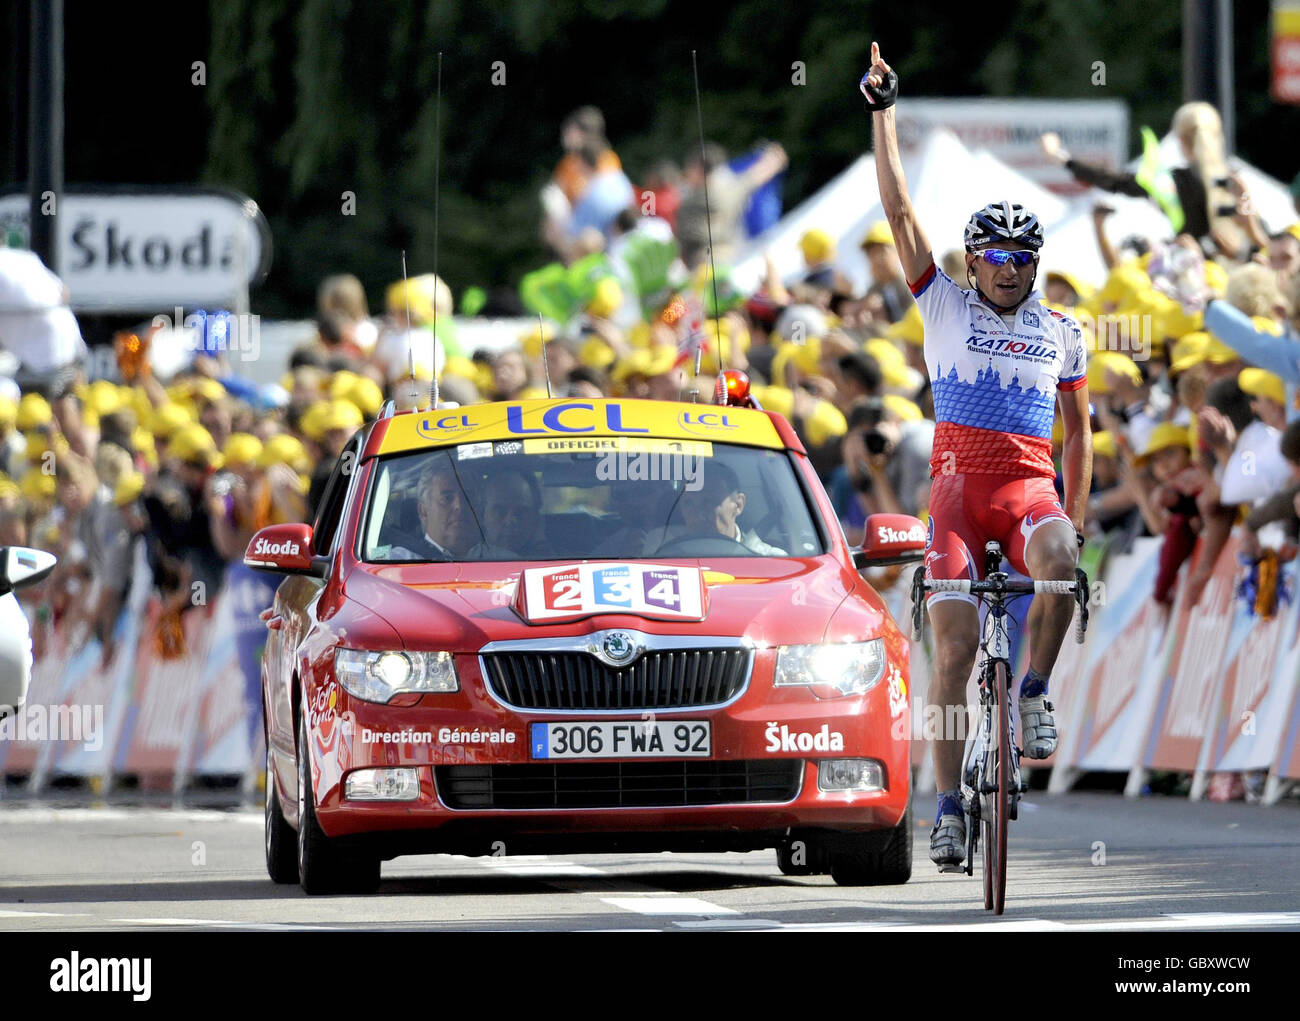 Cycling - Tour de France 2009 - Stage Fourteen. Sergei Ivanov crosses the line to win during the fourteenth stage of the Tour de France. Stock Photo